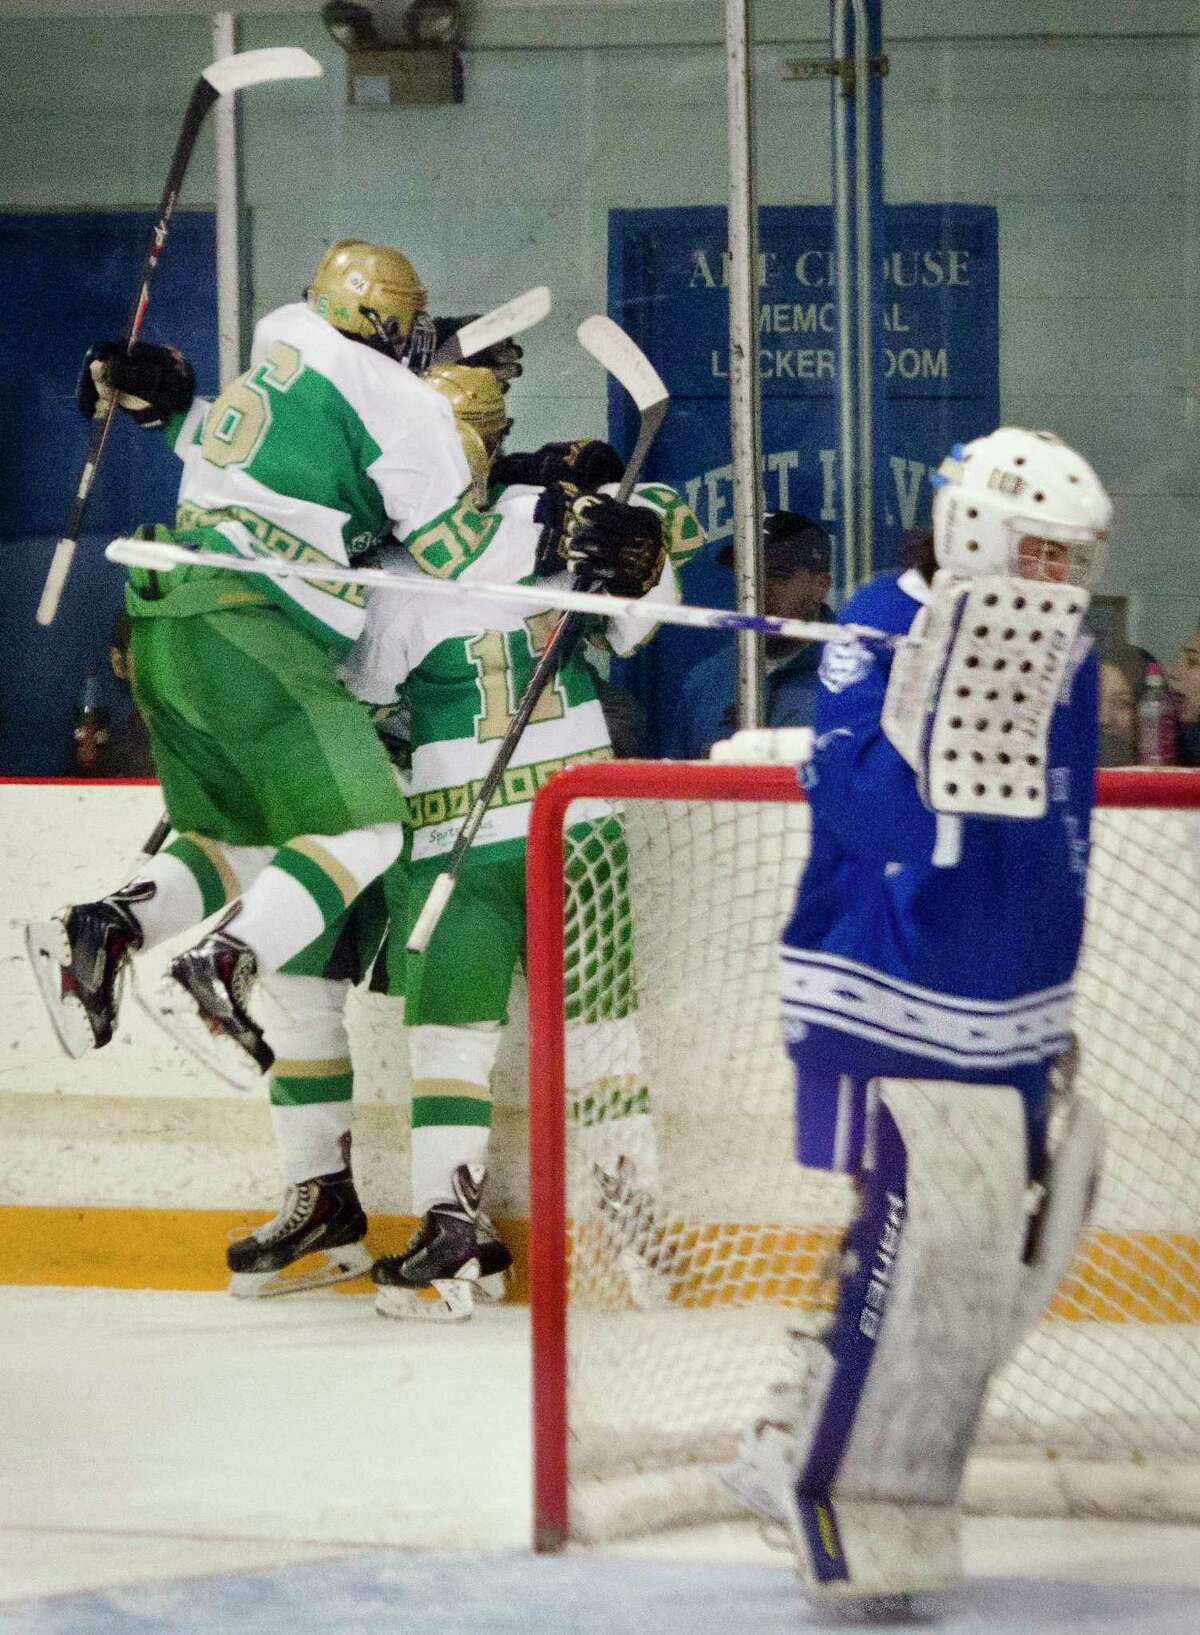 (Melanie Stengel — New Haven Register) West Haven goalie, Michael Savino, stands by as Notre Dame West Haven celebrates their first goal n 2nd period action